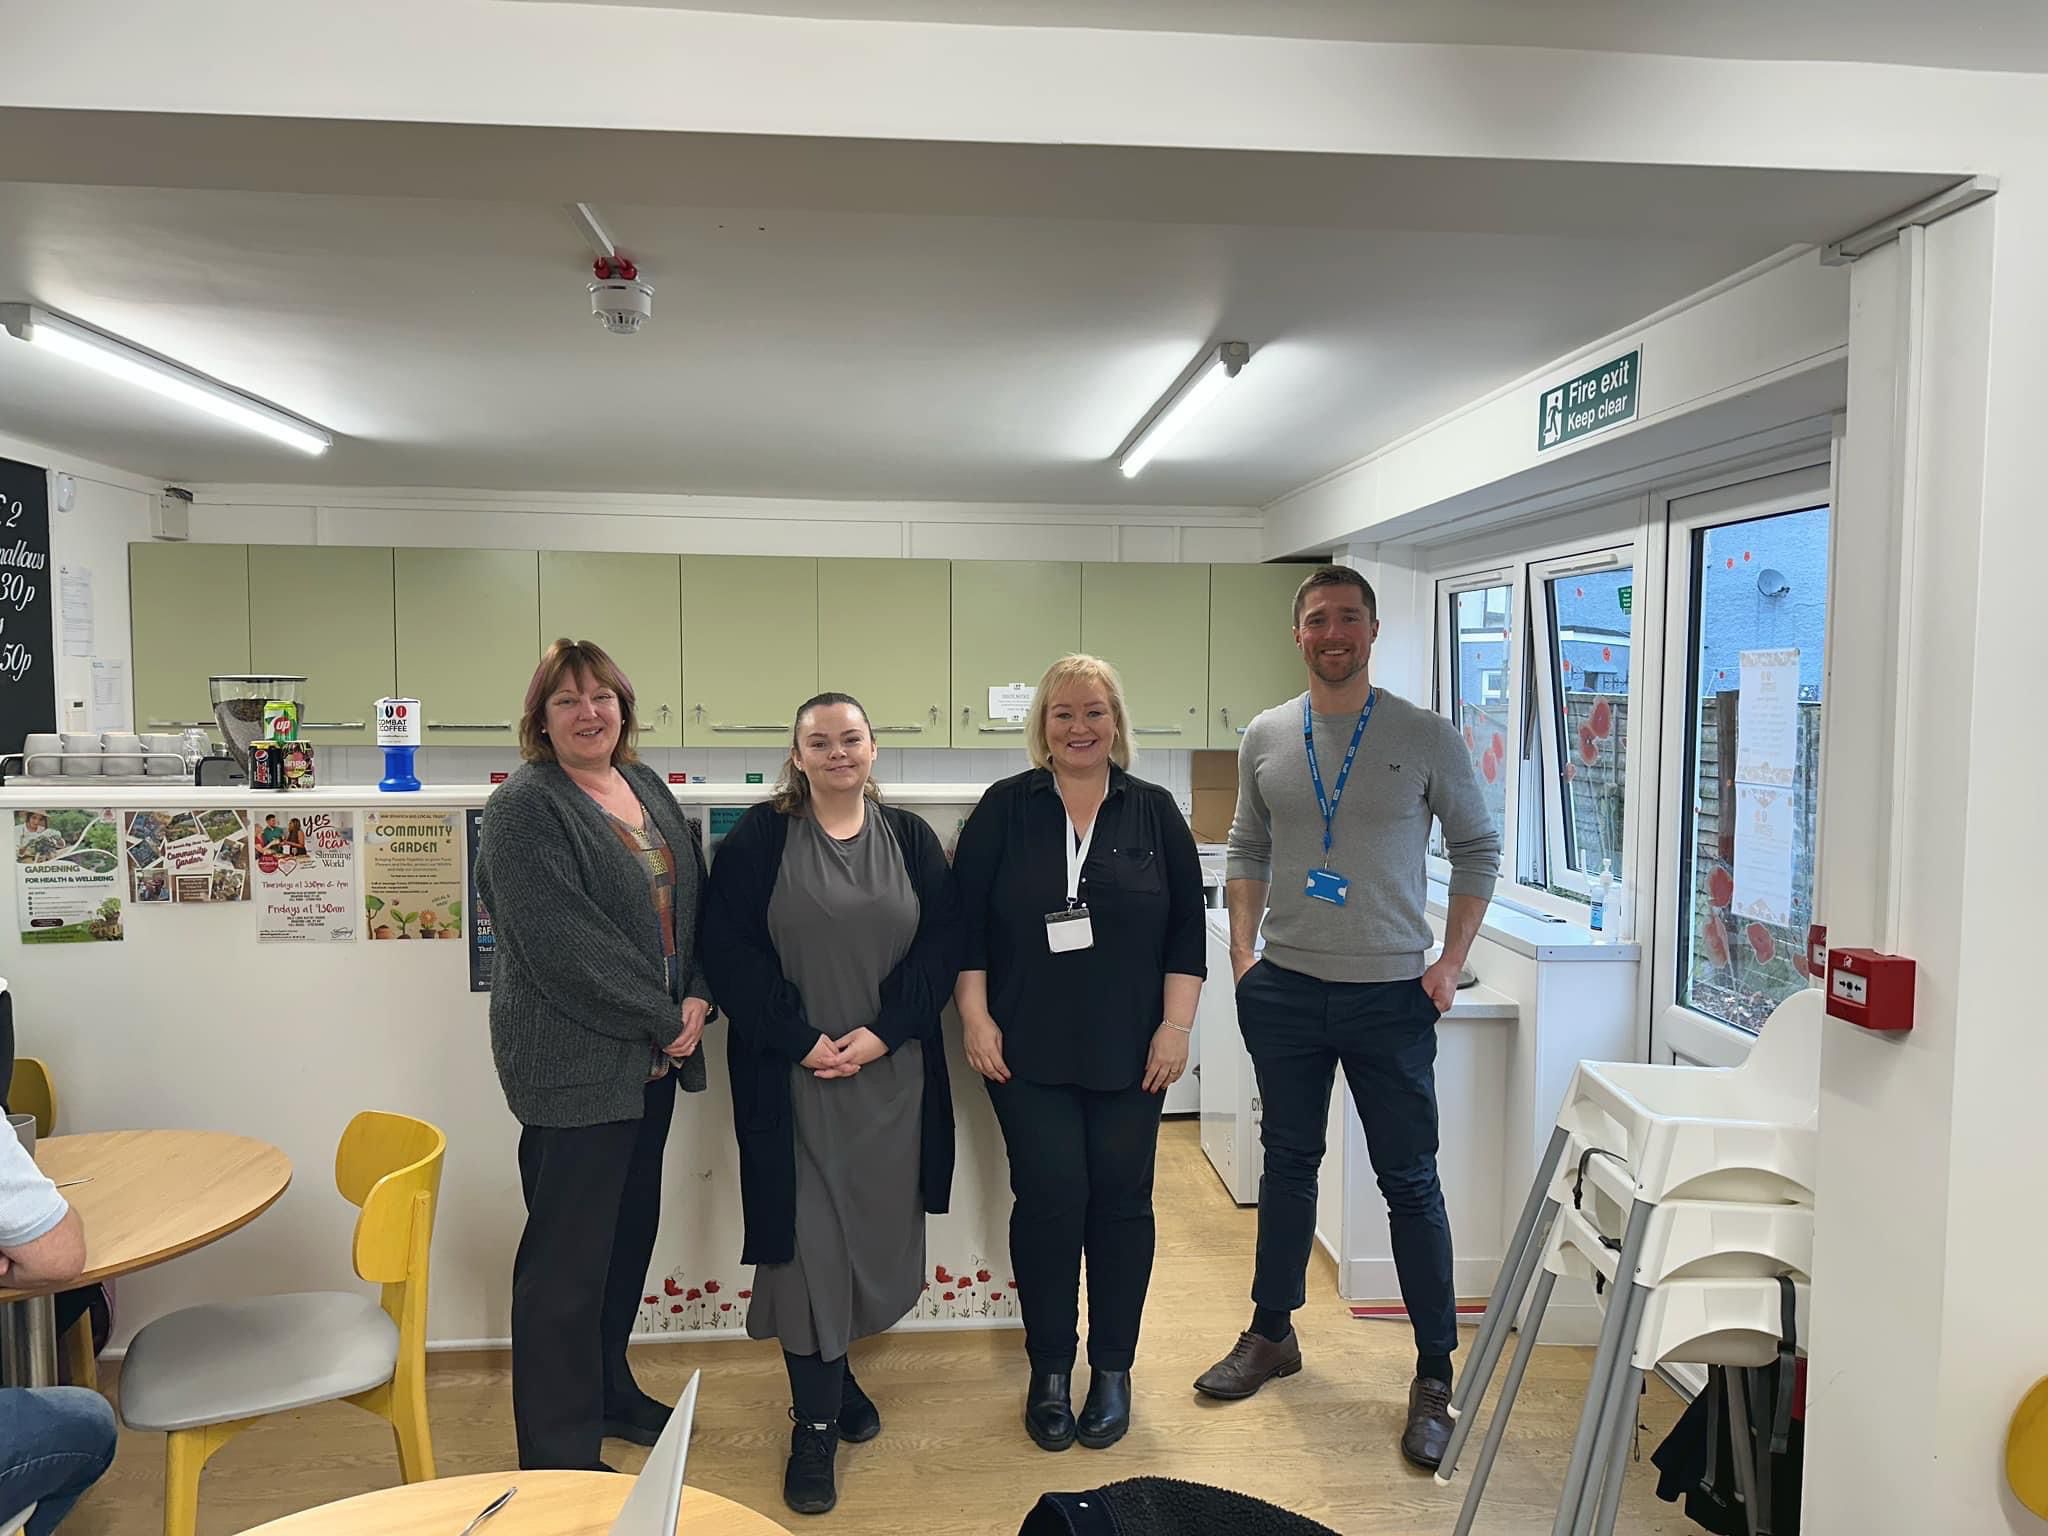 l to r  Tracey Dockery, Resident Member & Project Lead for the Friendly Bench and Community Garden.
Charlotte Osman, Resident Member and Chairperson. 
Julie Marker, Community Engagement Lead.
Chris Lawson, Integration & Partnerships Manager, Ipswich & East Suffolk Alliance NHS